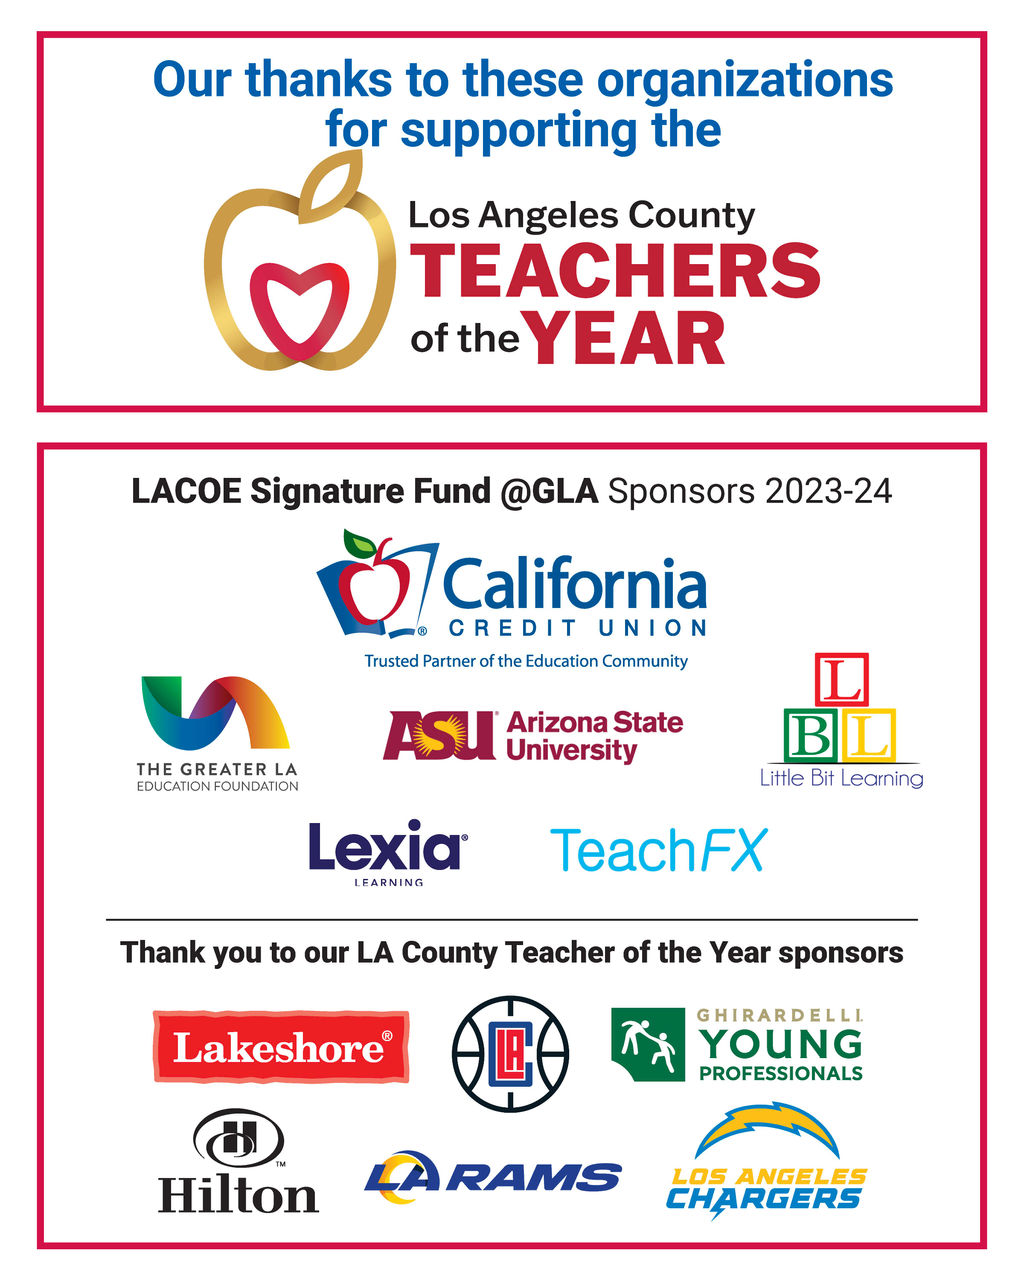 Flyer showing Teachers of the Year sponsors